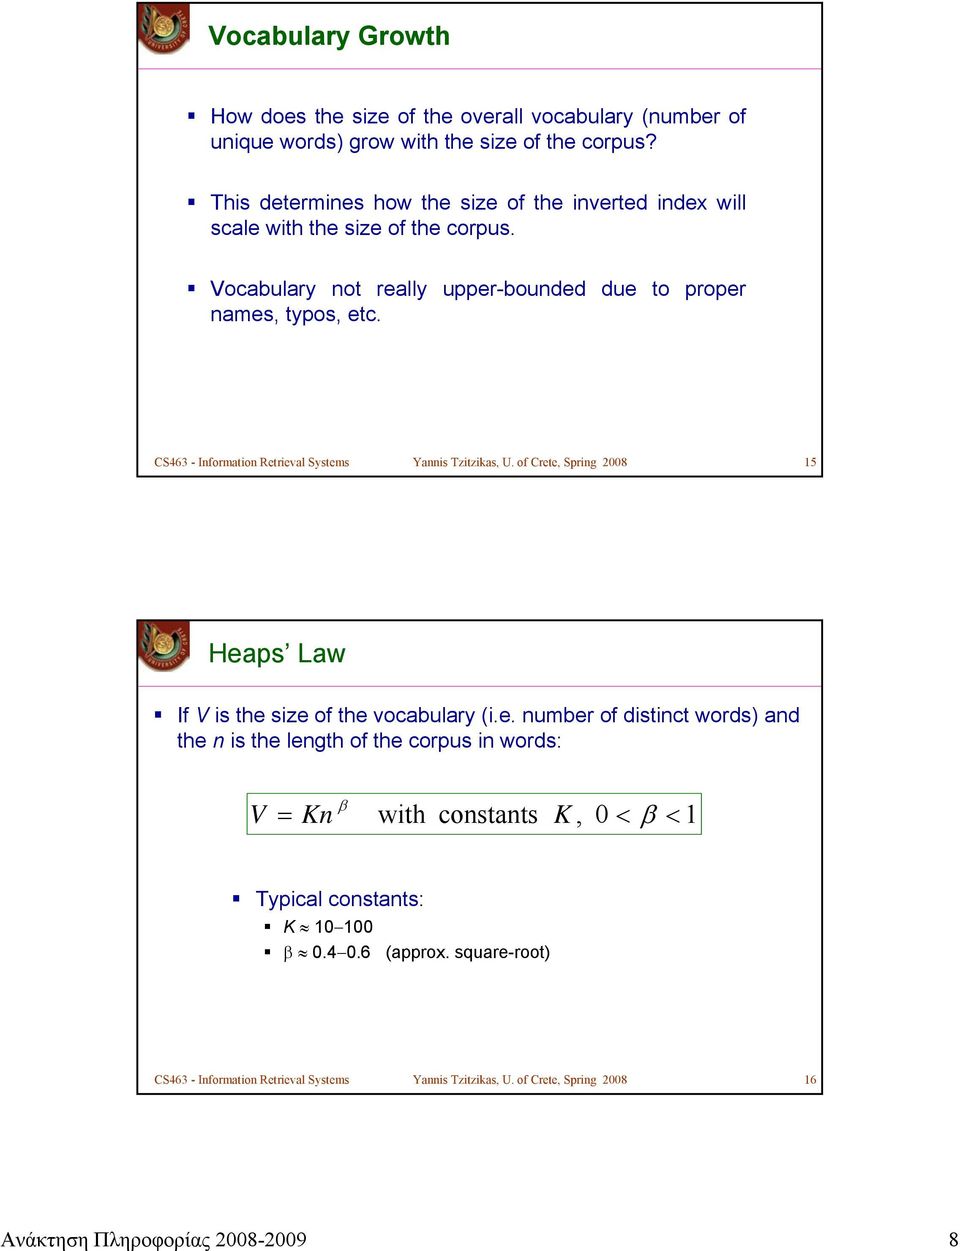 CS463 - Information Retrieval Systems Yannis Tzitzikas, U. of Crete, Spring 2008 15 Heaps Law If V is the size of the vocabulary (i.e. number of distinct words) and the n is the length of the corpus in words: V β = Kn with constants K, 0 < β < 1 Typical constants: K 10 100 β 0.